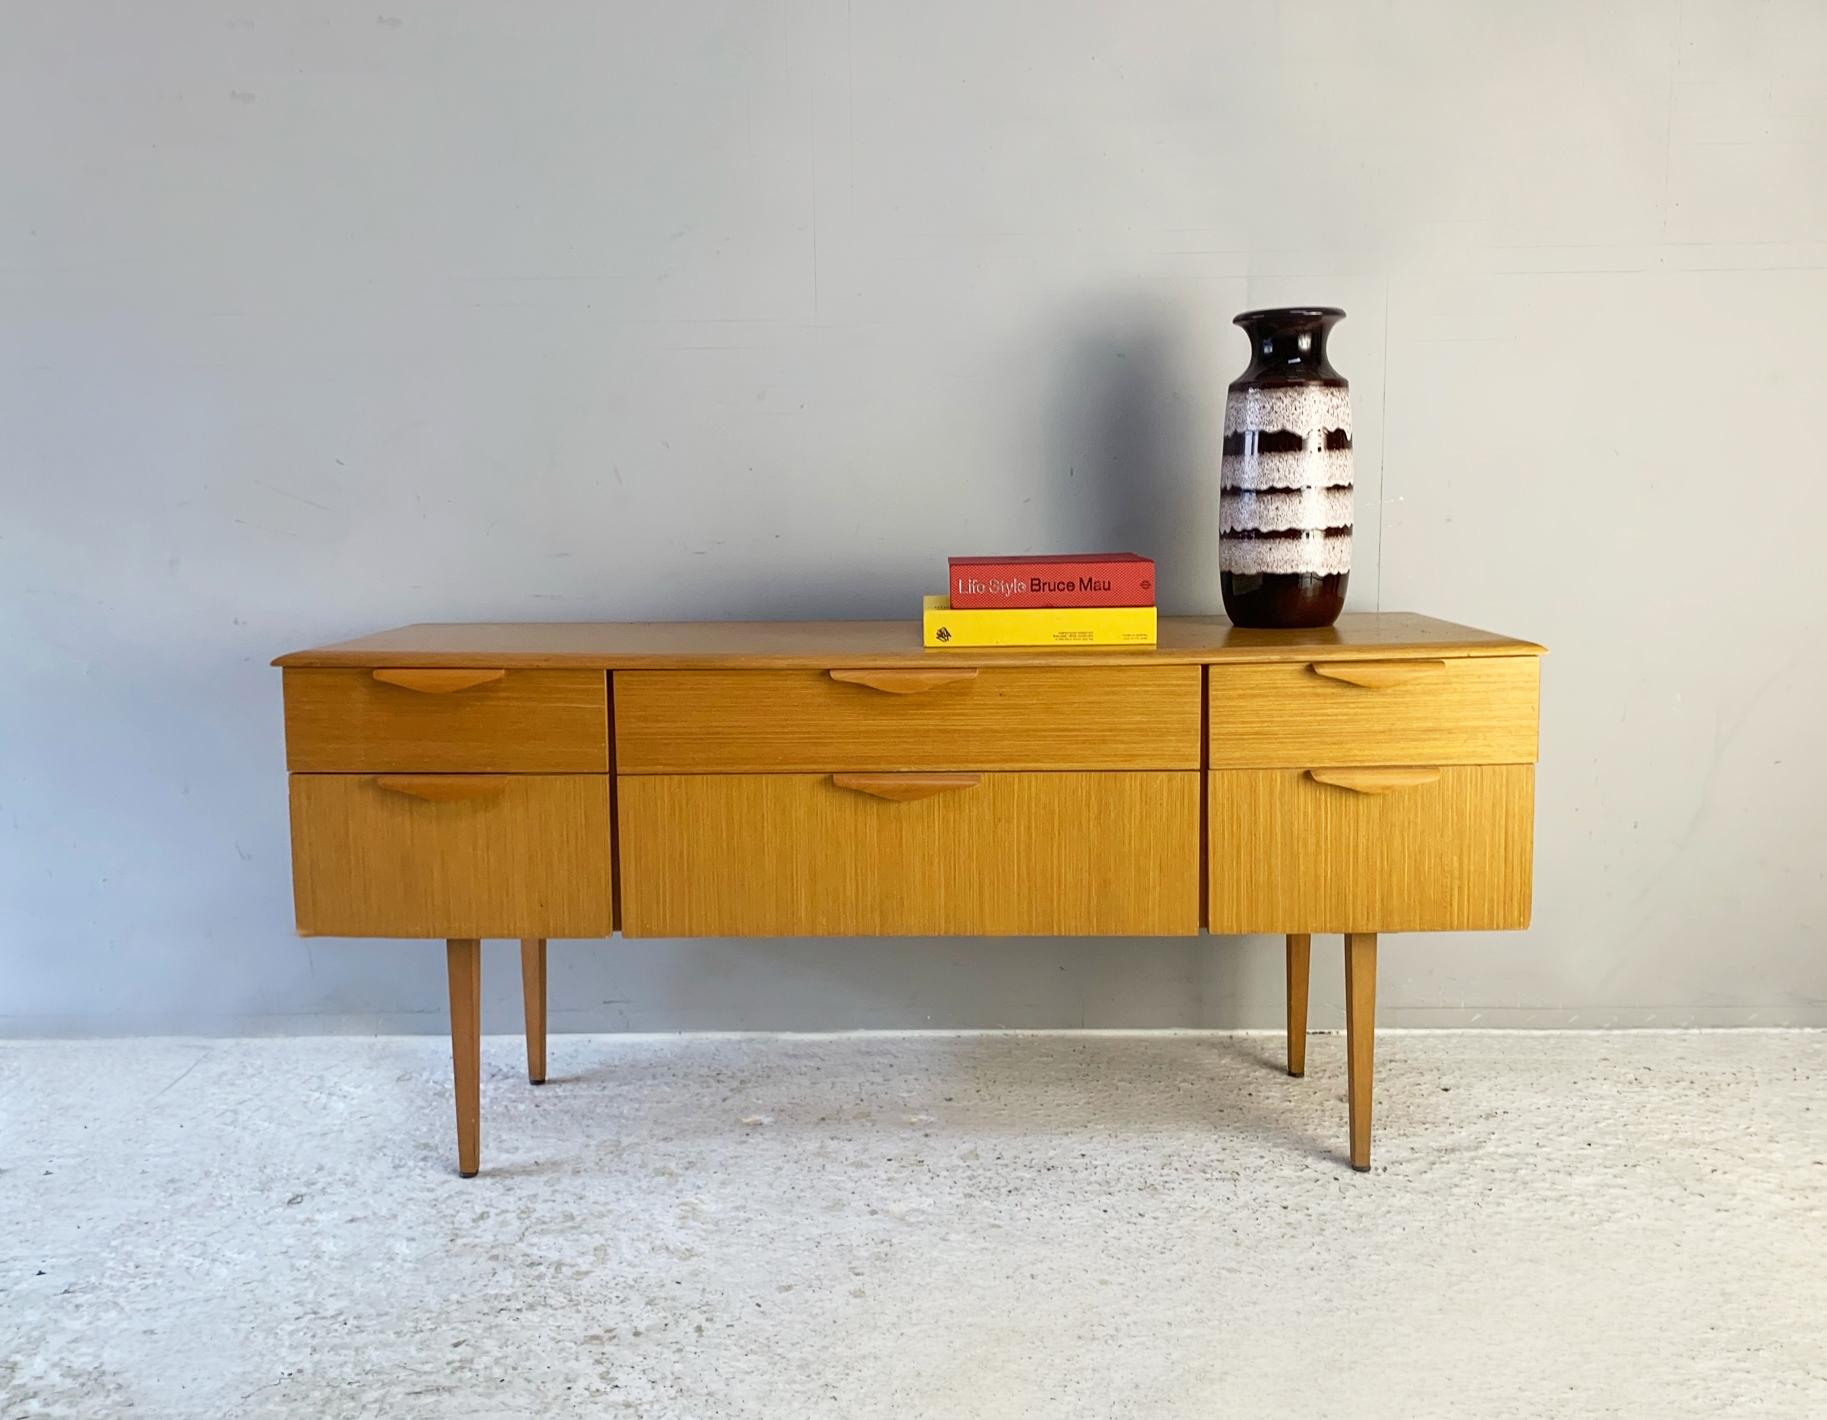 This can be used equally well as a chest of drawers for the bedroom or a sideboard for the living room.

Blonde wood with nicely contoured handles and a bevelled edge top.

Size 
Width 152cm x depth 47cm x height 68cm

Condition:
Very good